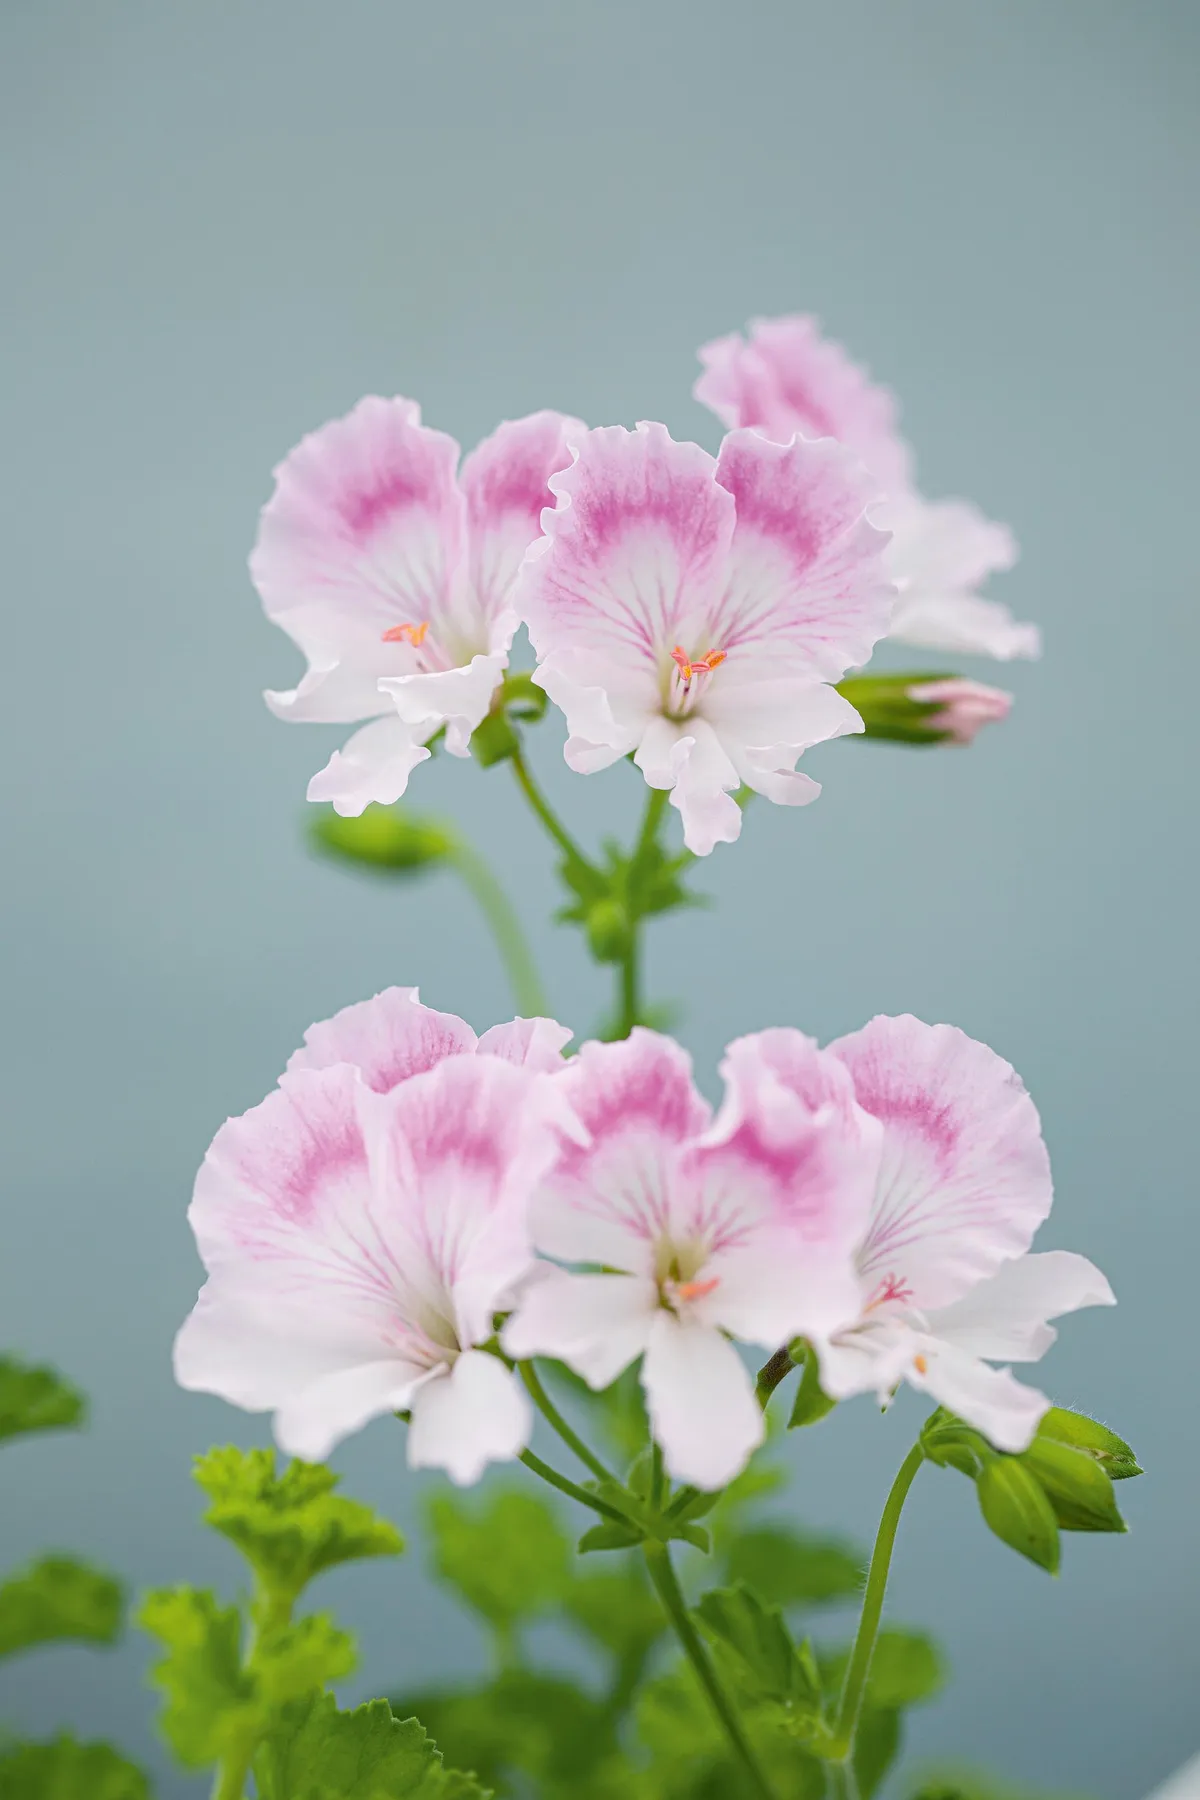 Pelargonium ‘Quantock May’. Introduced in 1999, this plant has a lax, trailing habit that is unique among Angels. The frilly flowers are white, with the upper petals flushed pale pink with fine cerise feathering. A pretty, understated, very floriferous plant. 50cm. RHS H1C, USDA 9b-13.